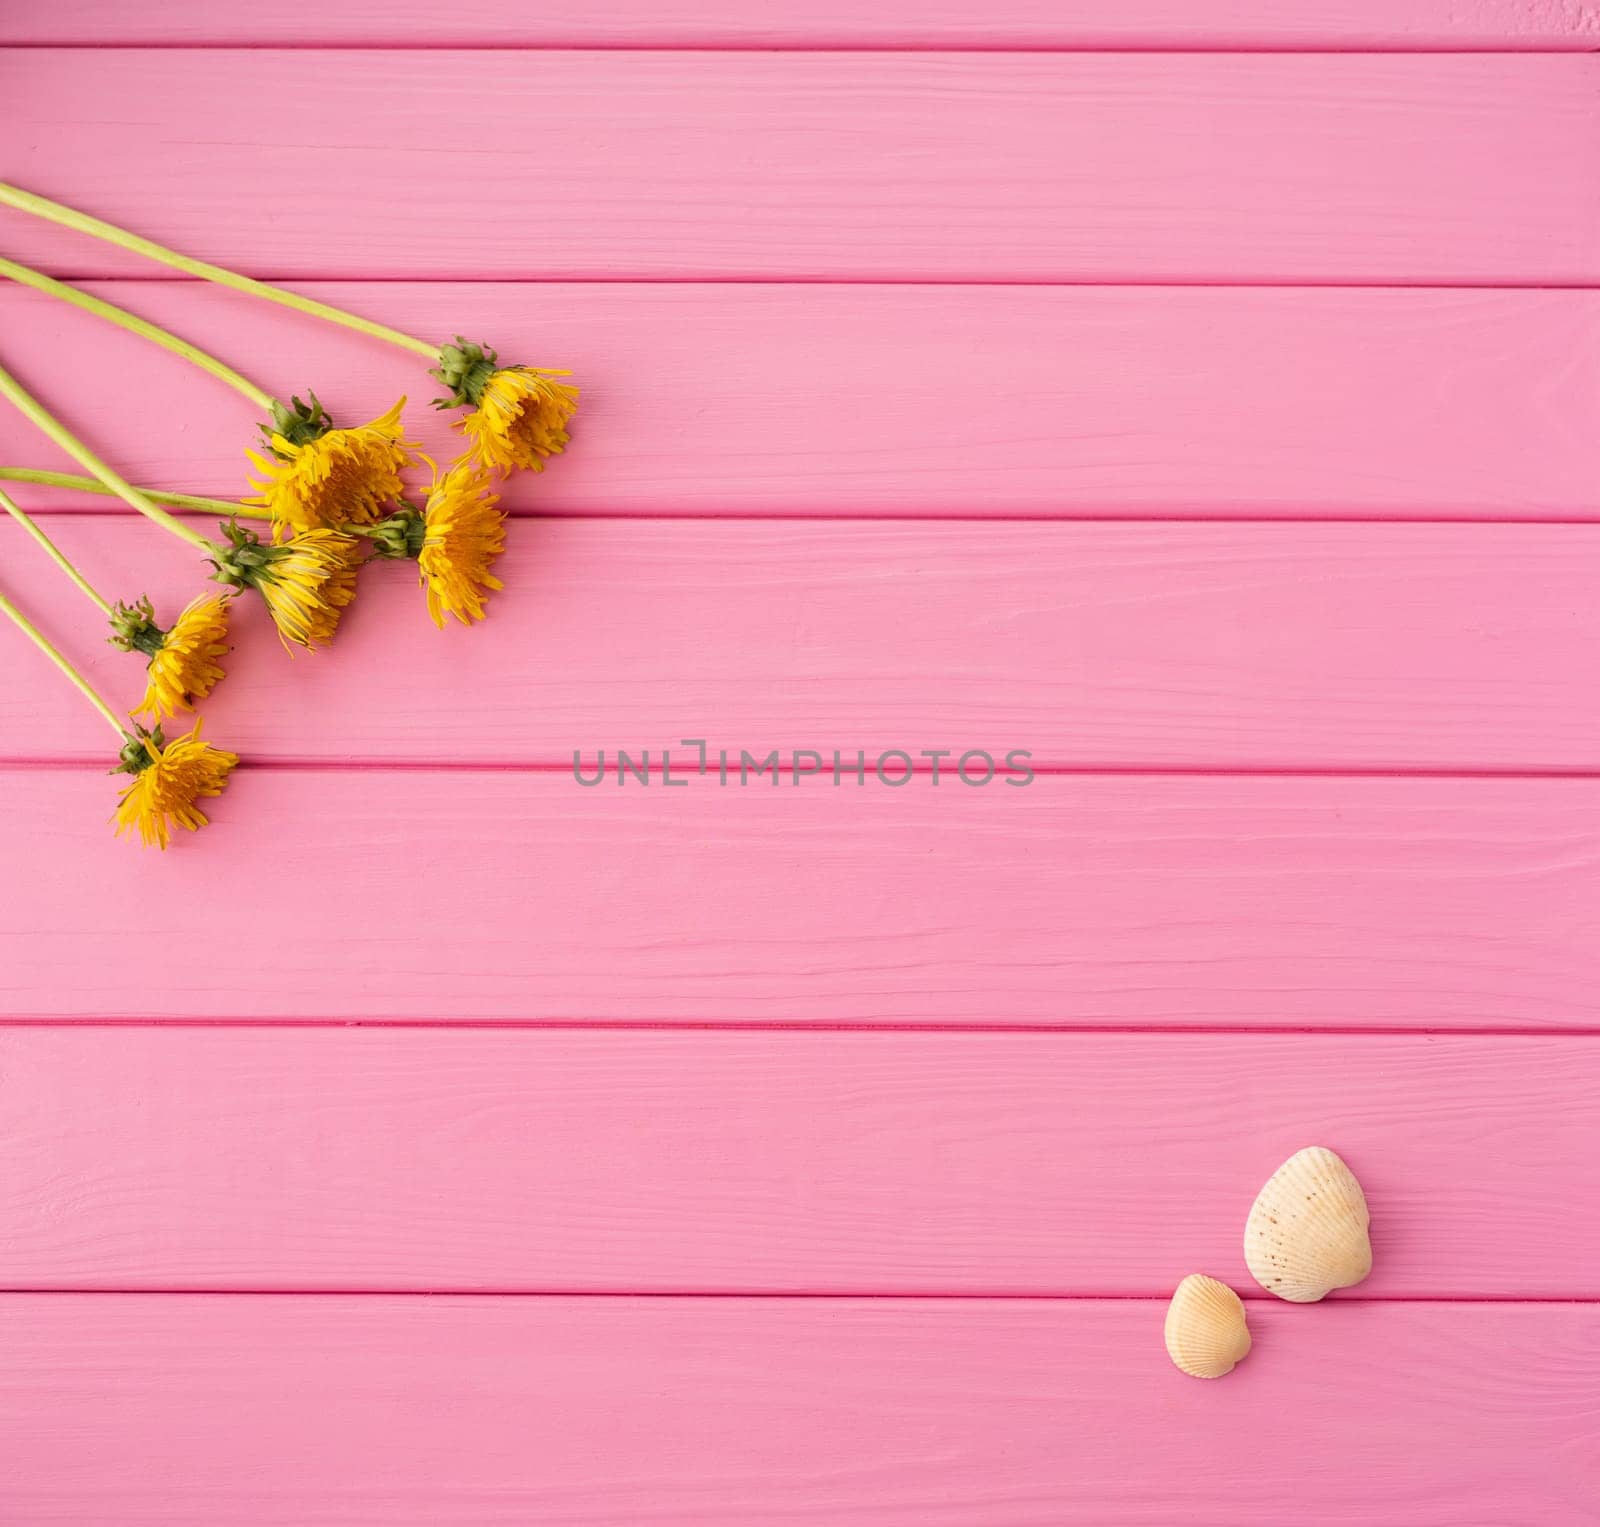 Summer abstract background mockup corners flowers borders frames yellow dandelions by AndriiDrachuk